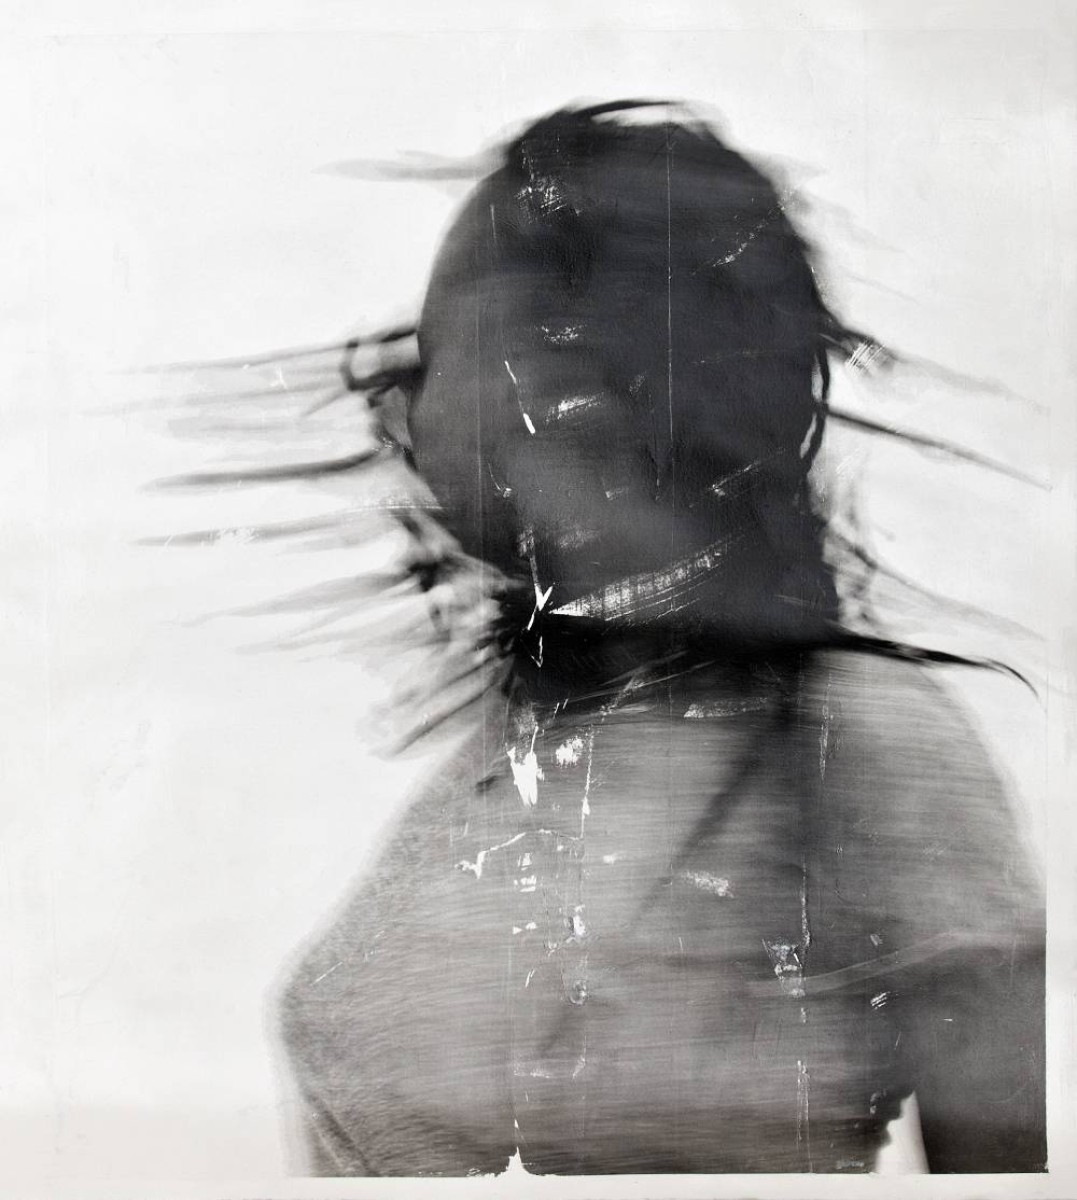 Black and white photographic work by Sandra Brewster